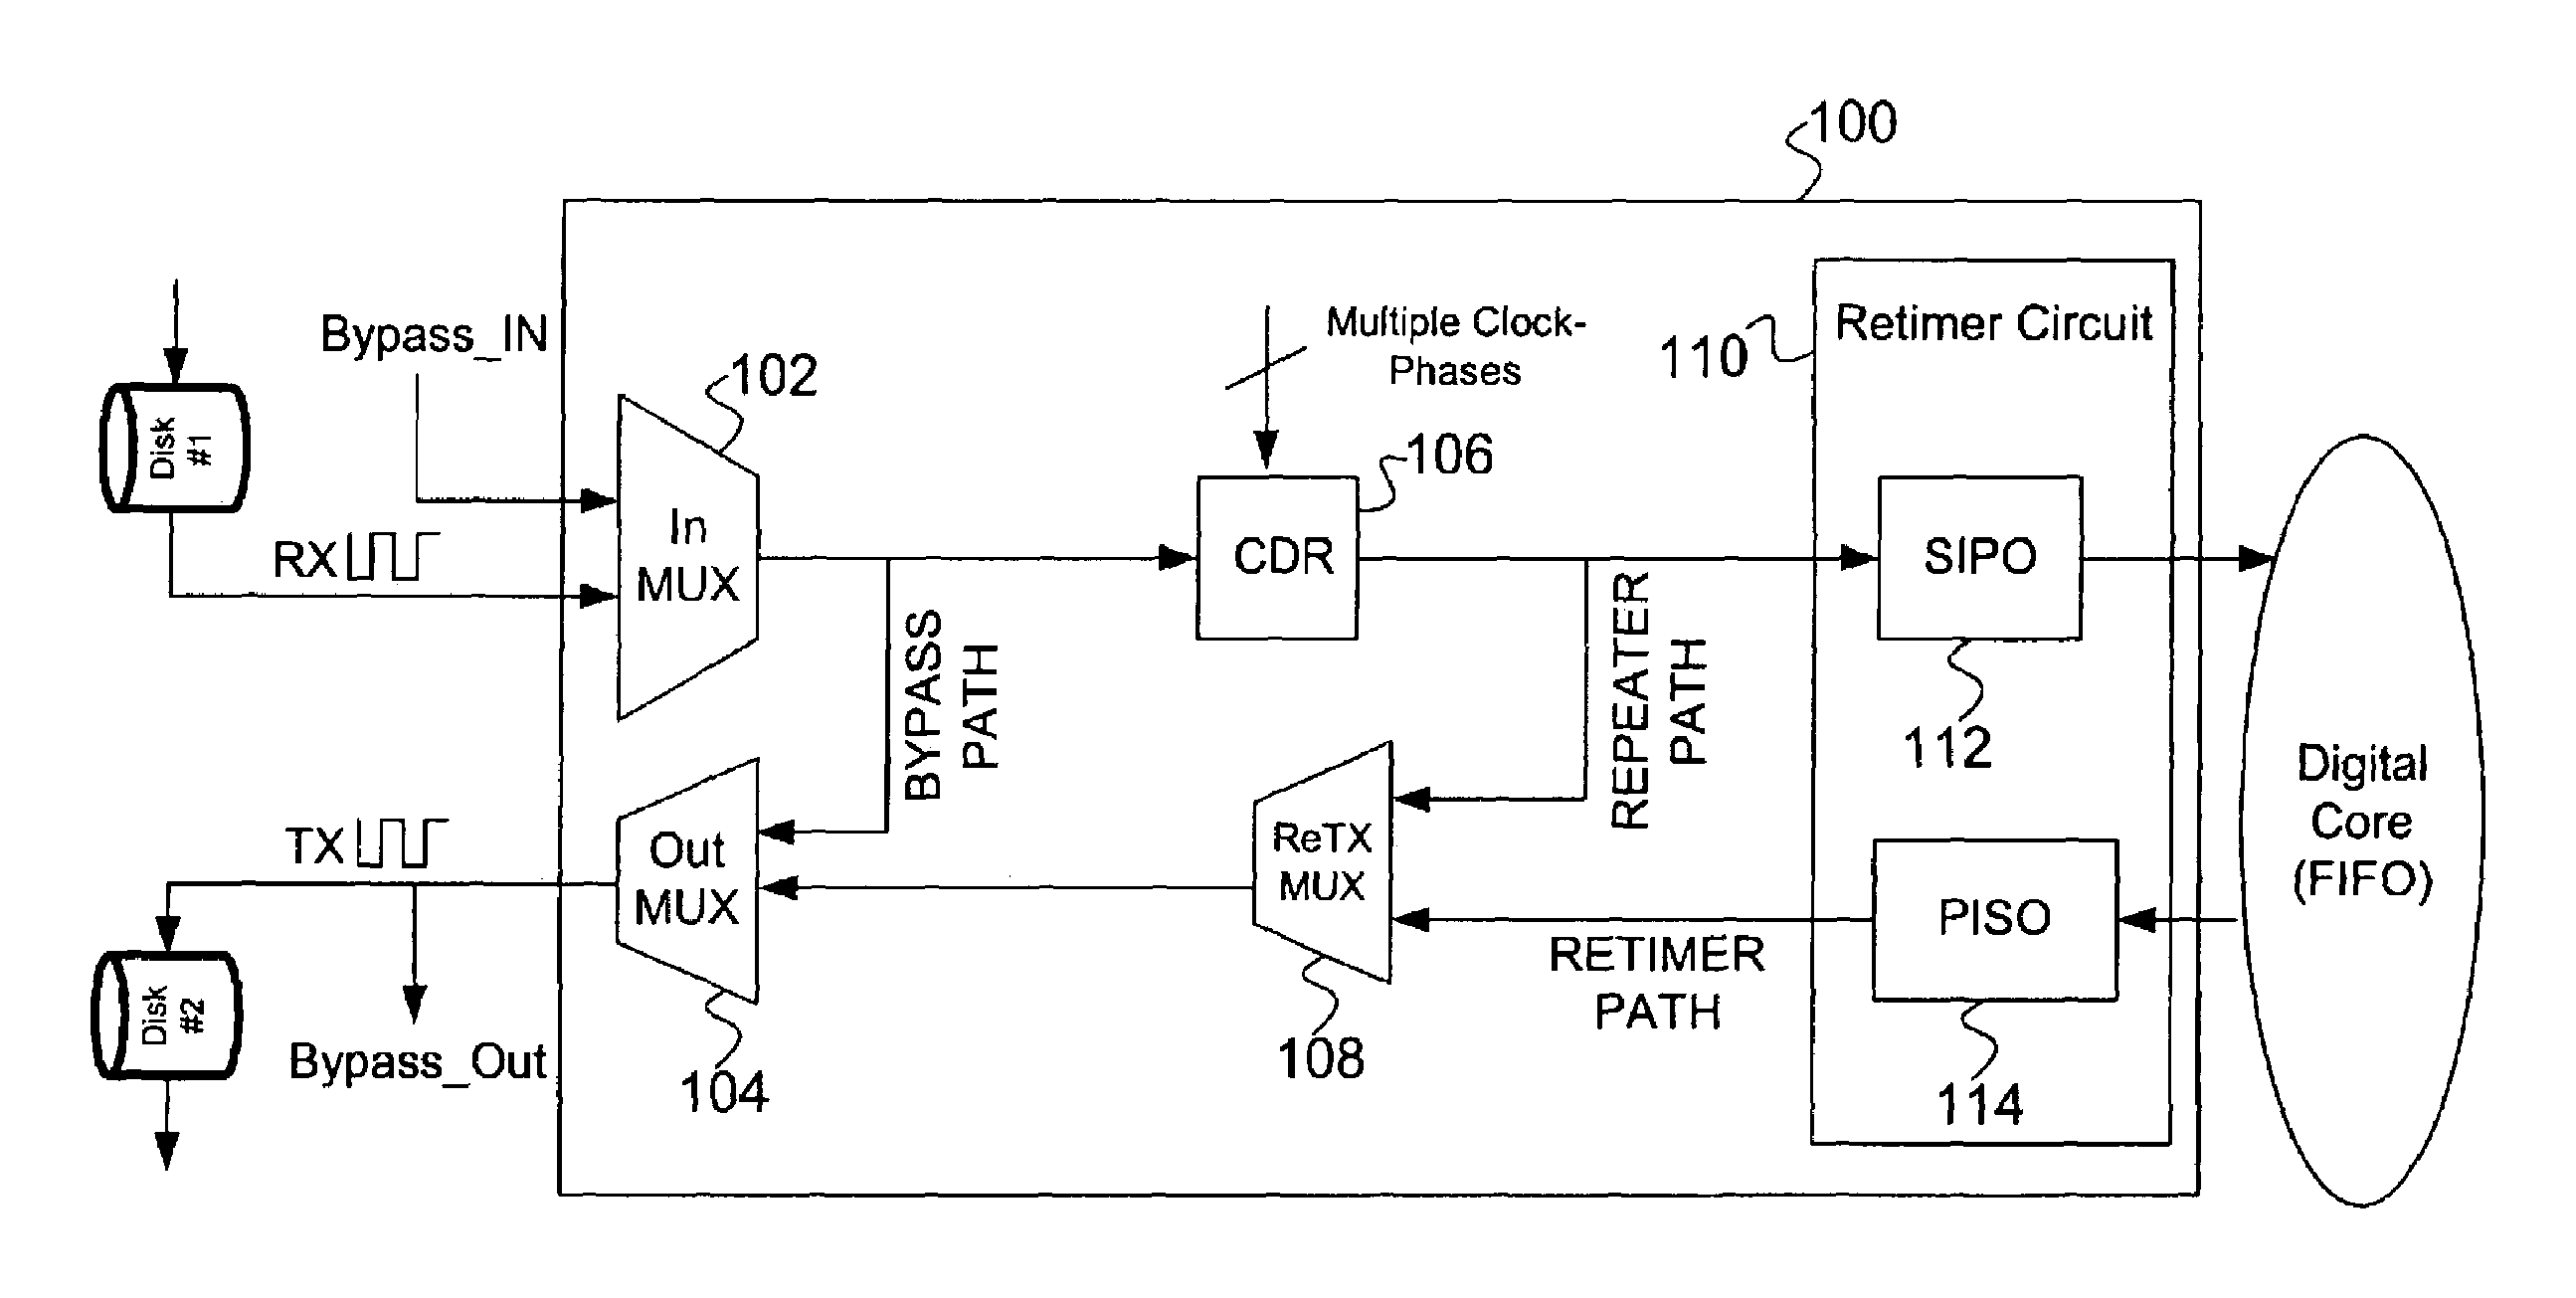 Multi-function bypass port and port bypass circuit